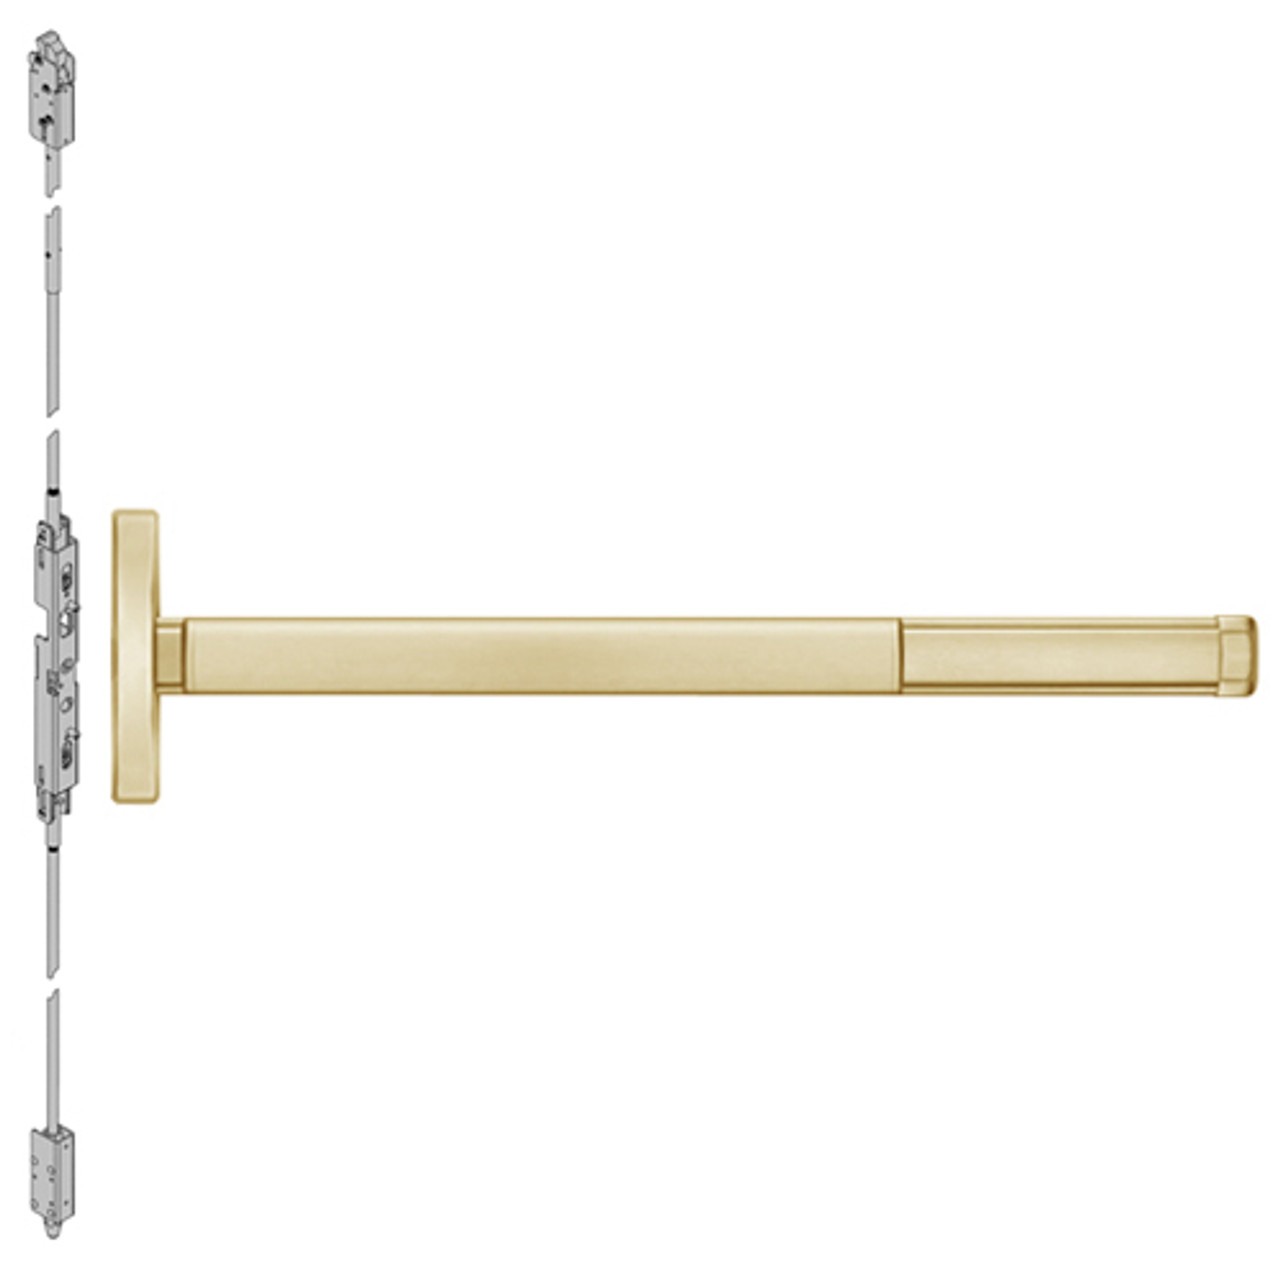 TSFL2614LBR-606-48 PHI 2600 Series Fire Rated Concealed Vertical Rod Exit Device with Touchbar Monitoring Switch Prepped for Lever Always Active in Satin Brass Finish